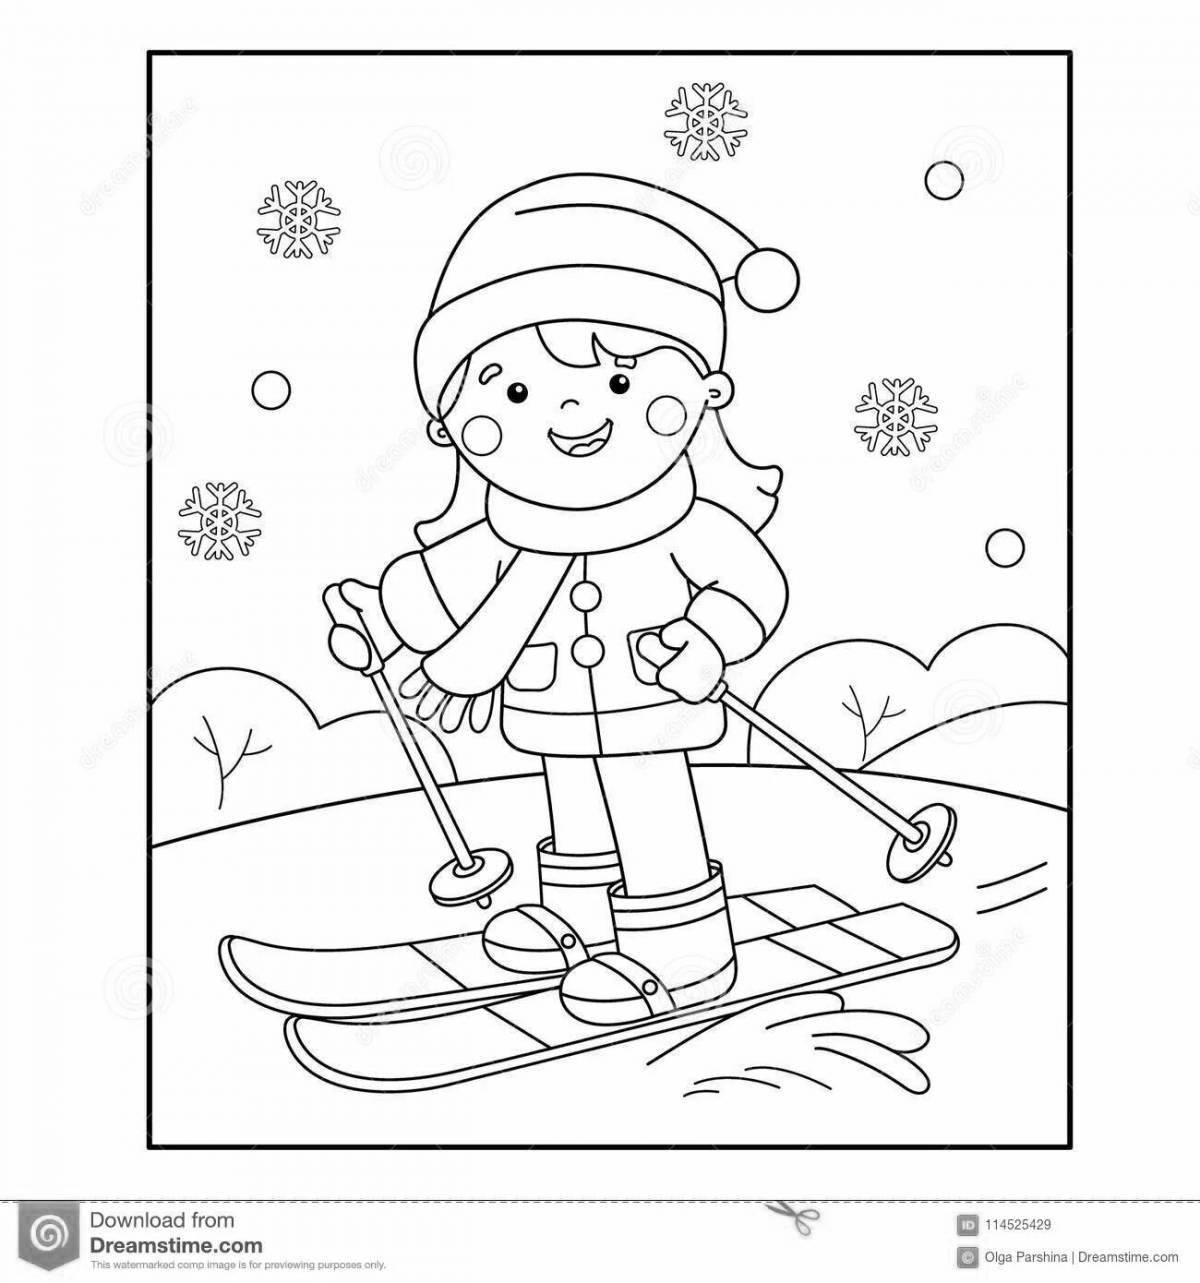 Large winter sports coloring page